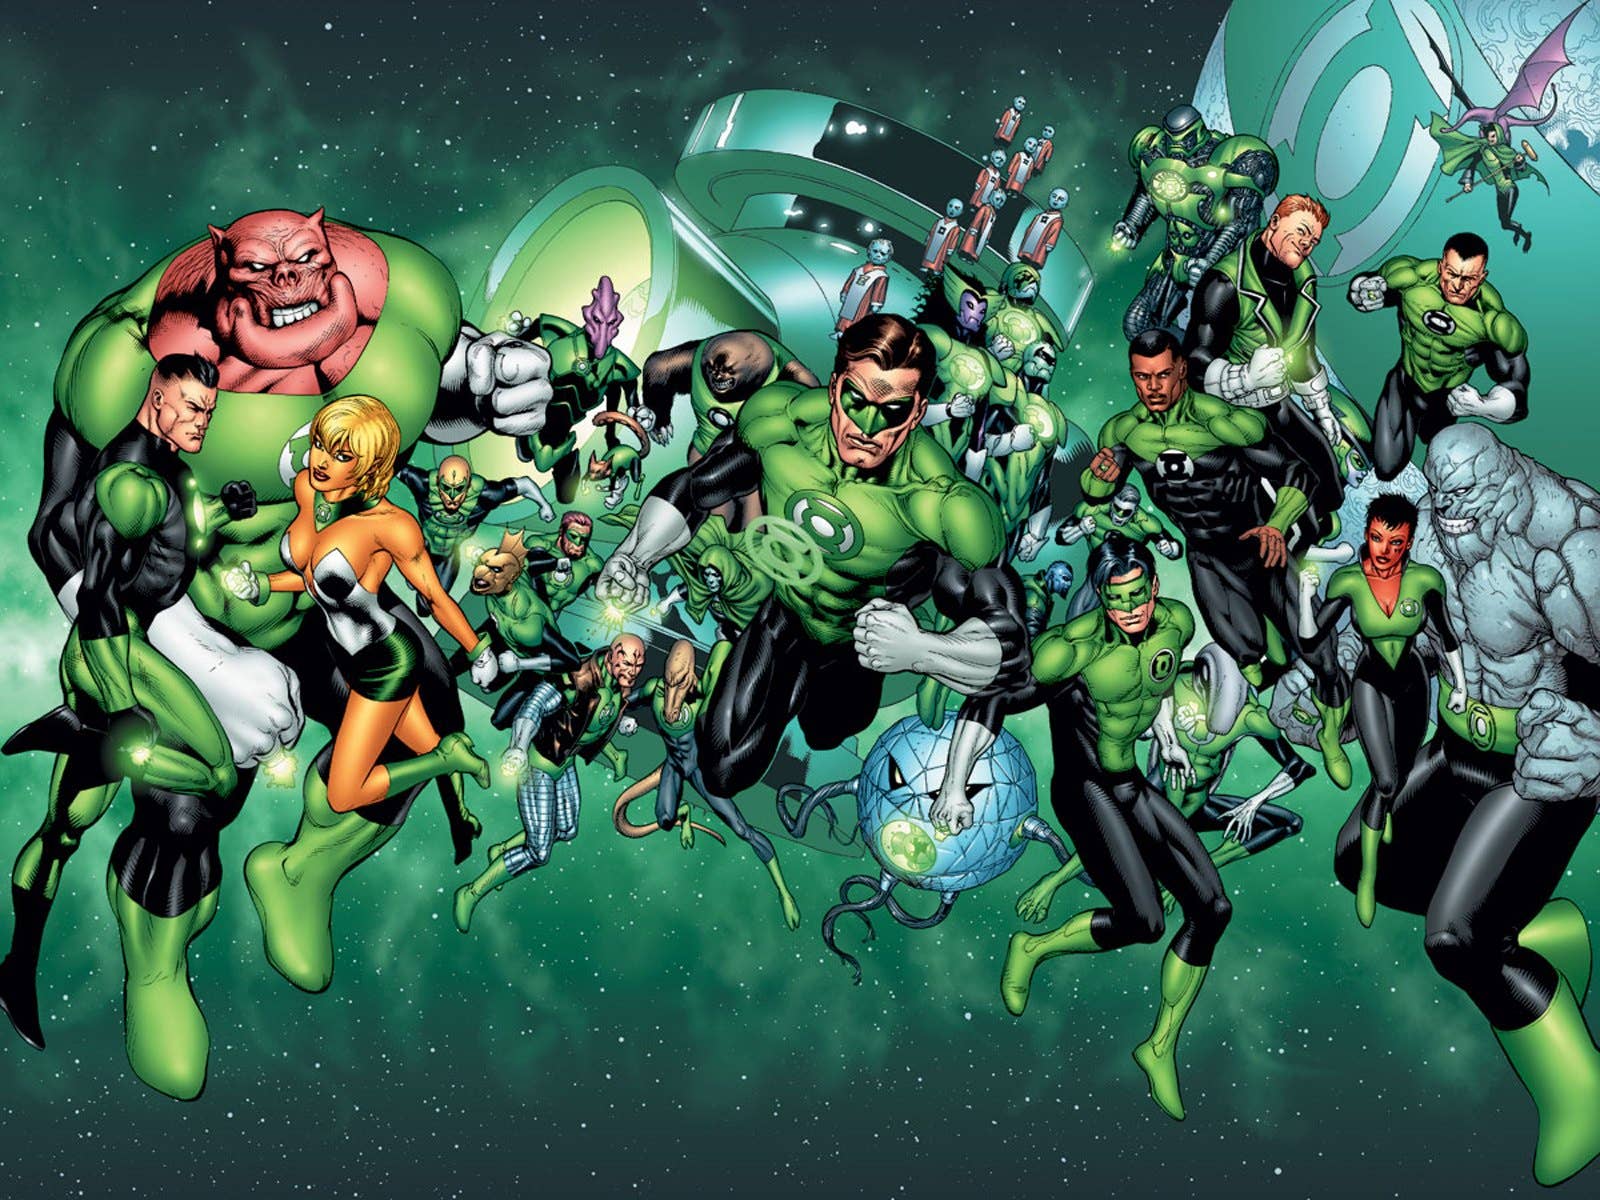 Grant Morrison will relaunch DC's Green Lantern this fall with a 'police procedural' approach to Hal Jordan